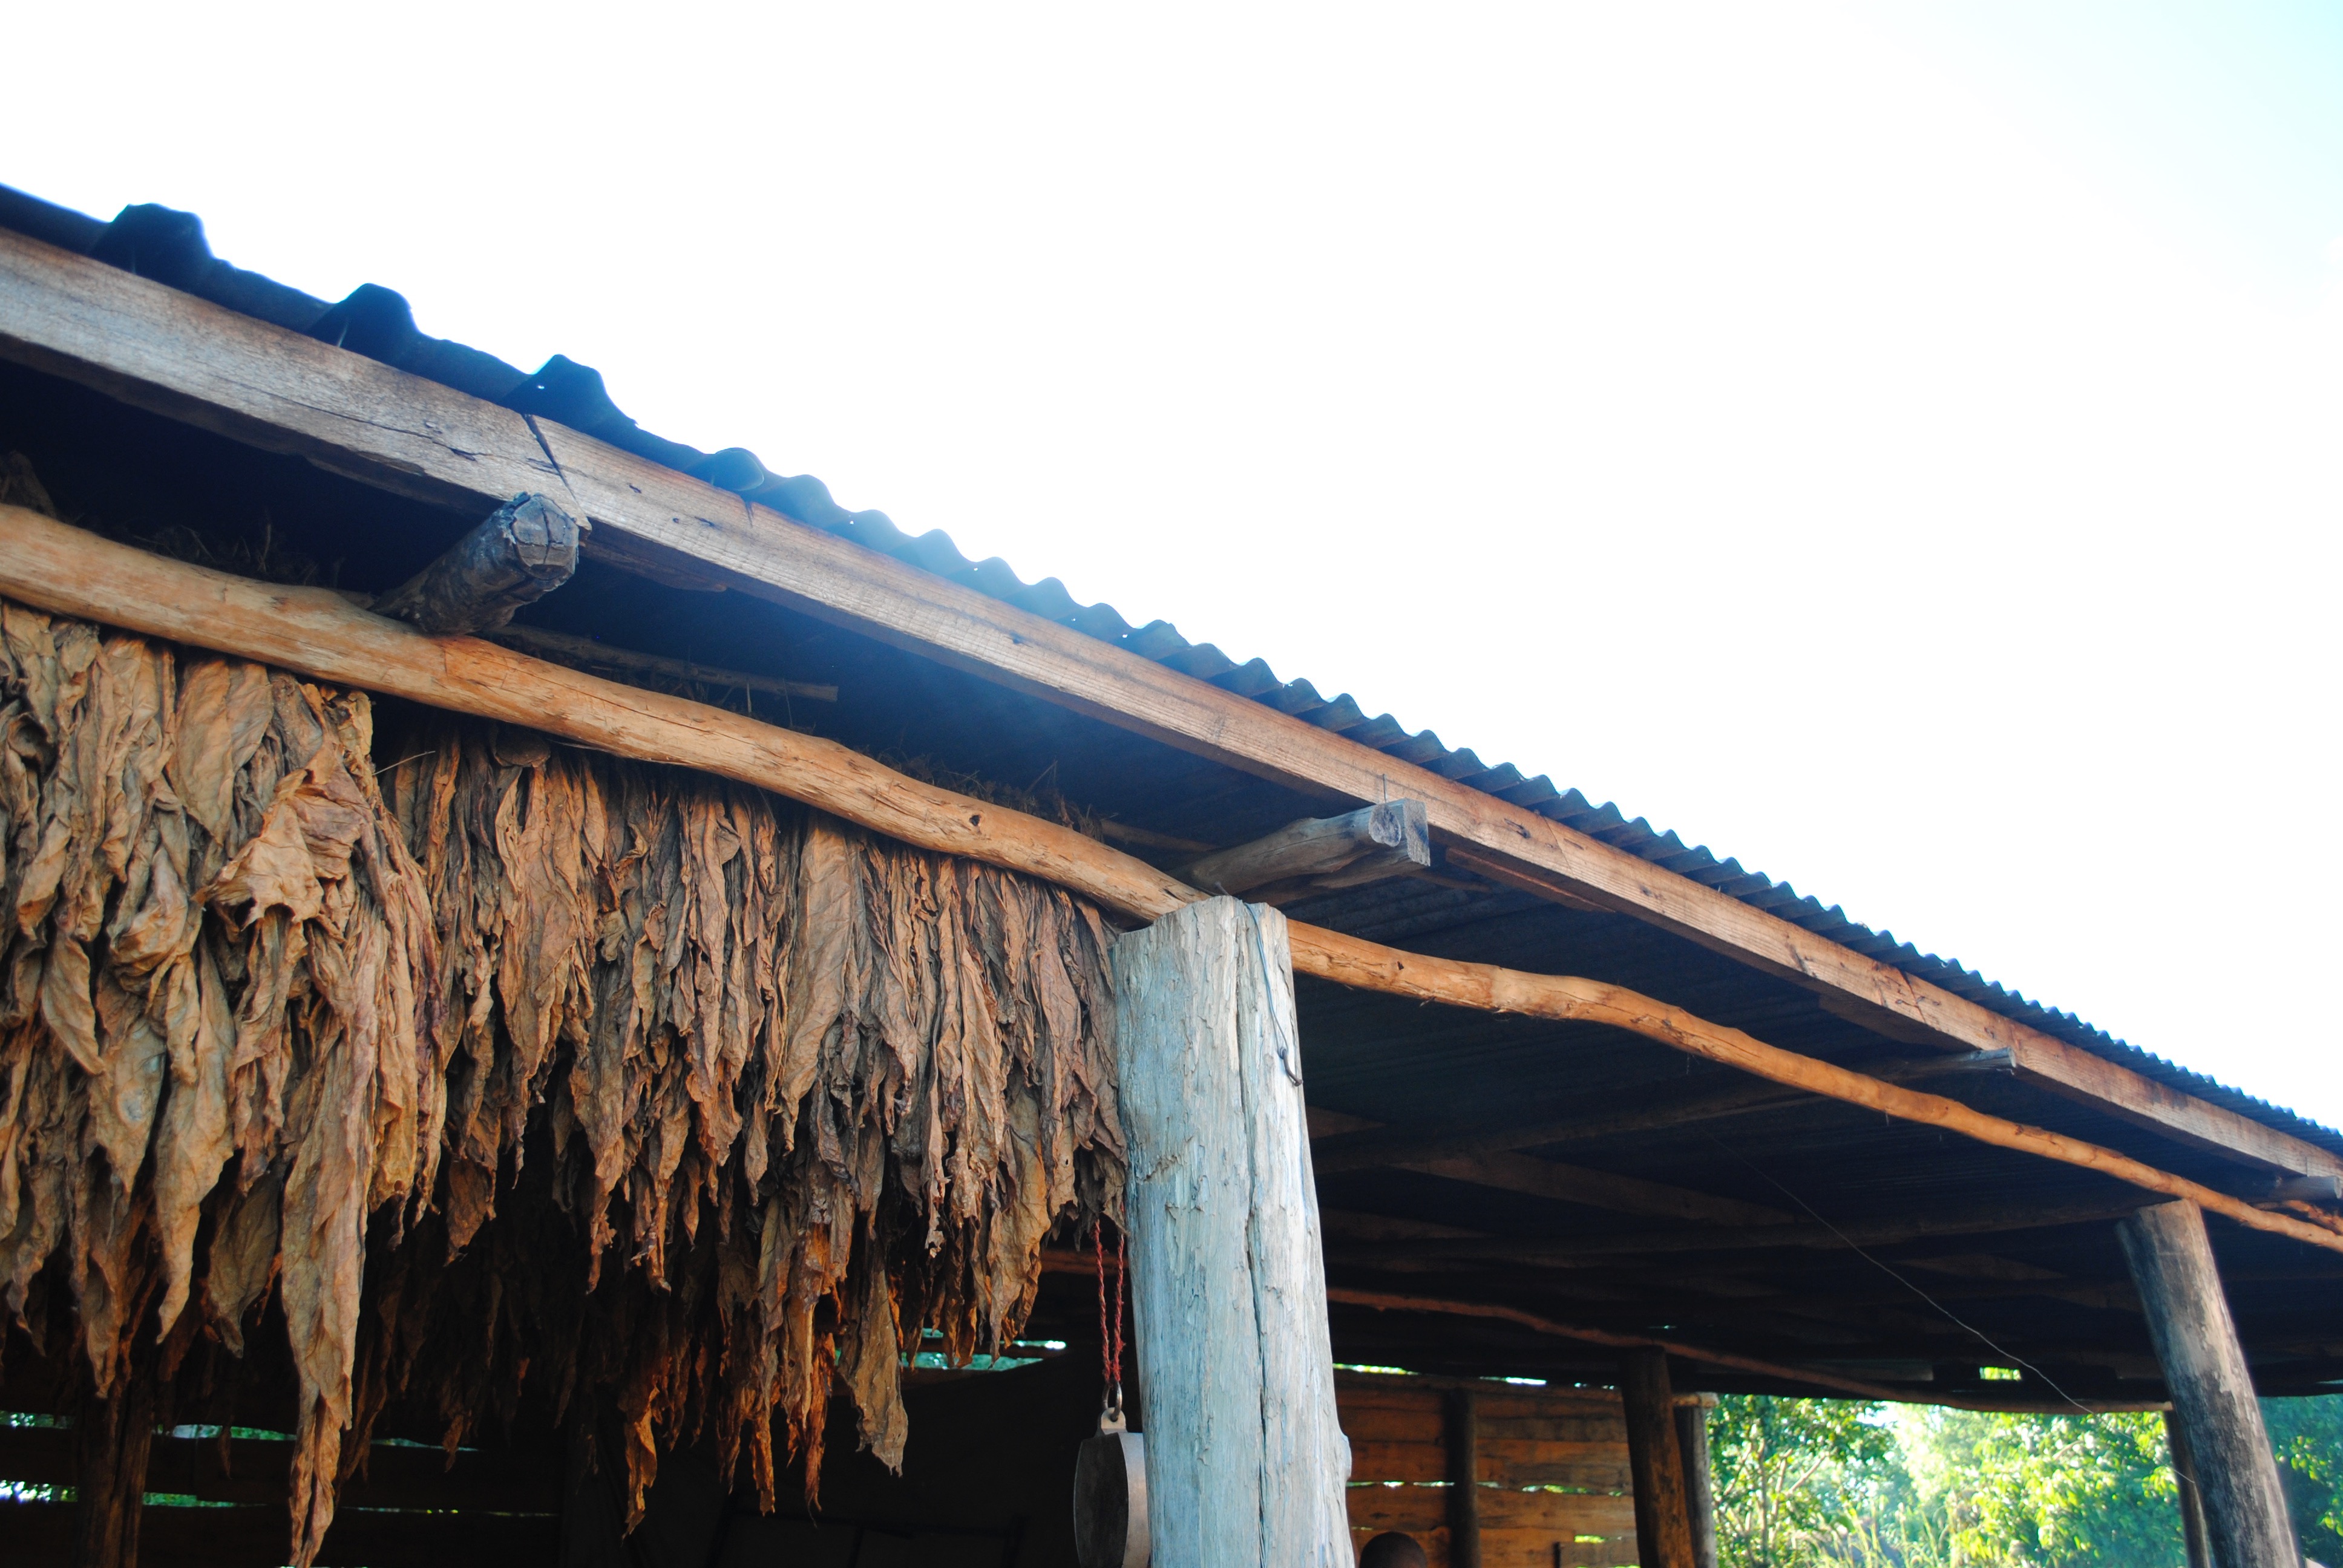 tobacco hanging to dry in Malawi, 2012